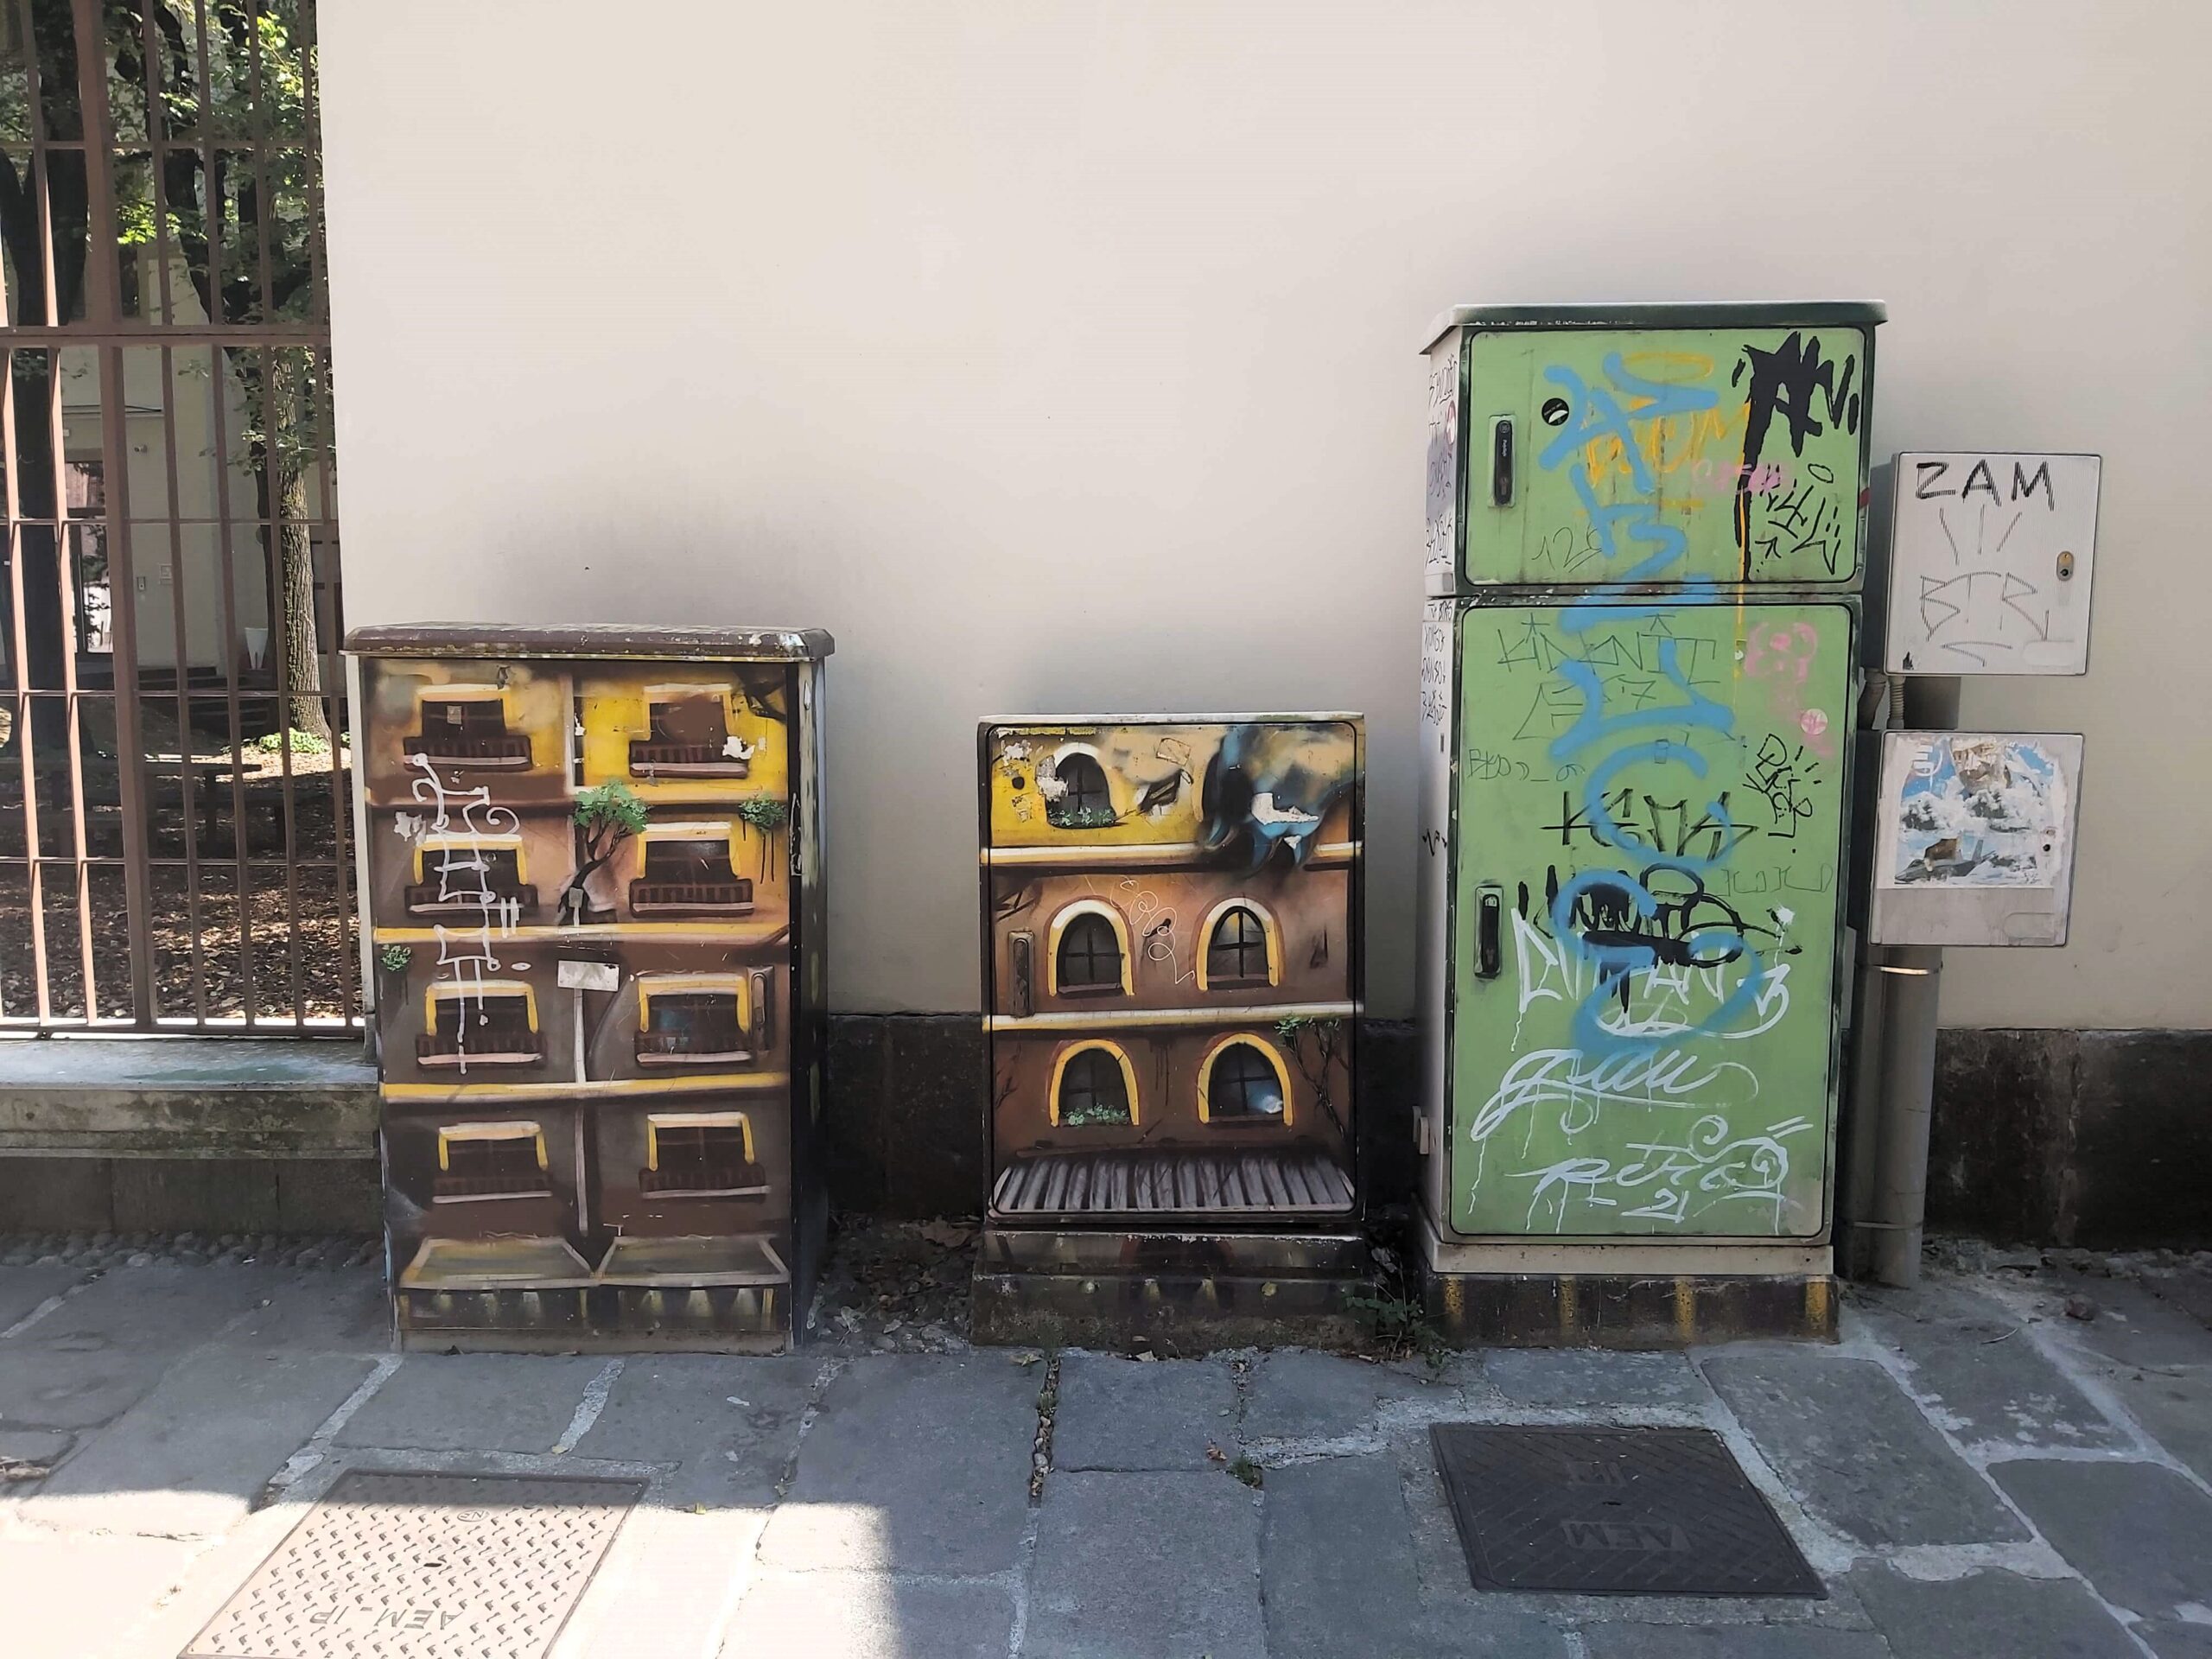 A graffiti image of buildings on utility units in Milan, Italy